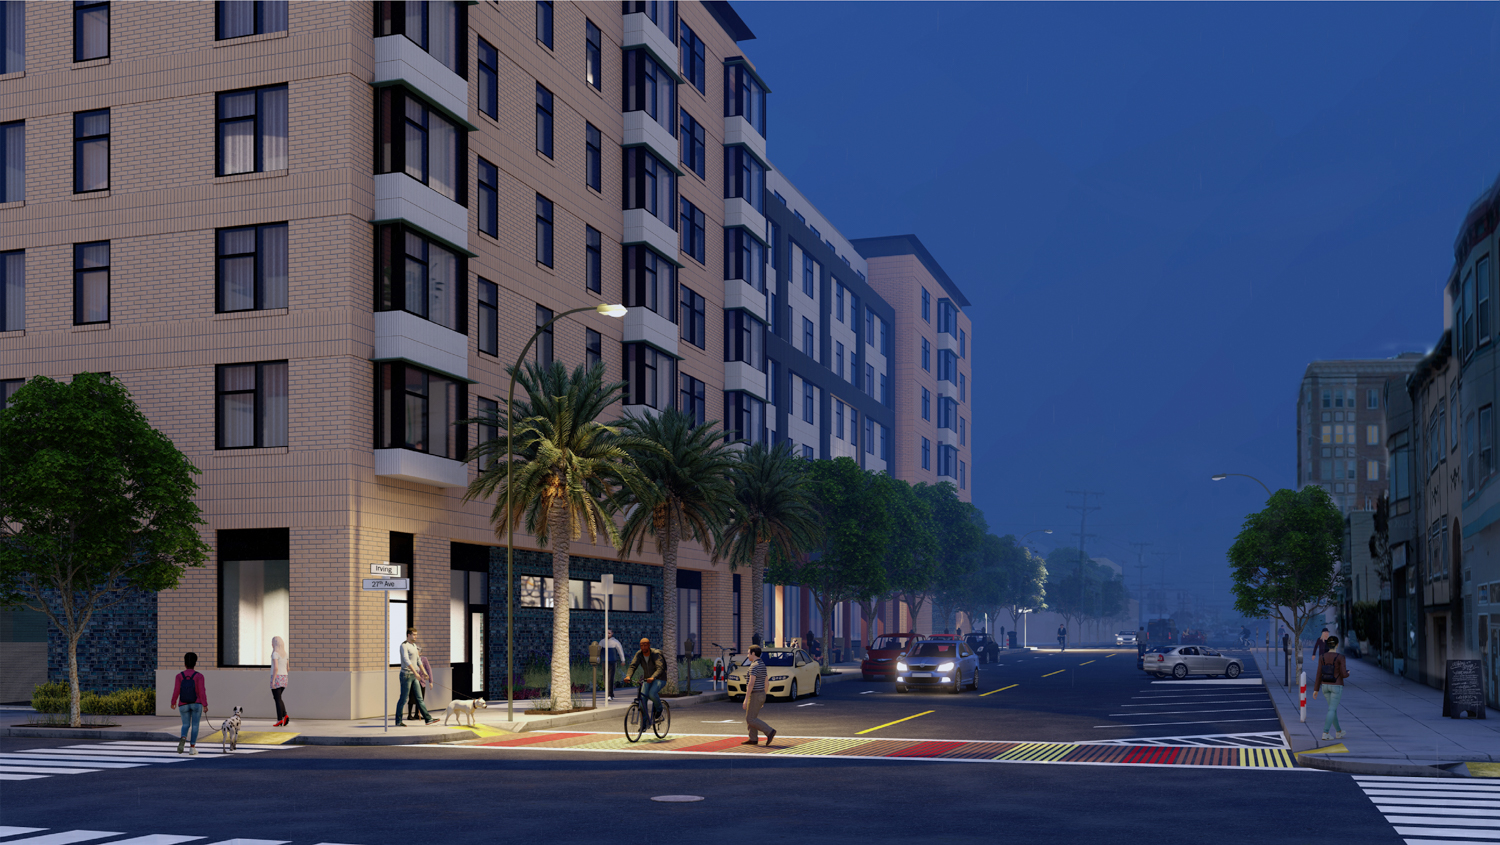 2550 Irving Street at dusk, rendering by Pyatok Architects